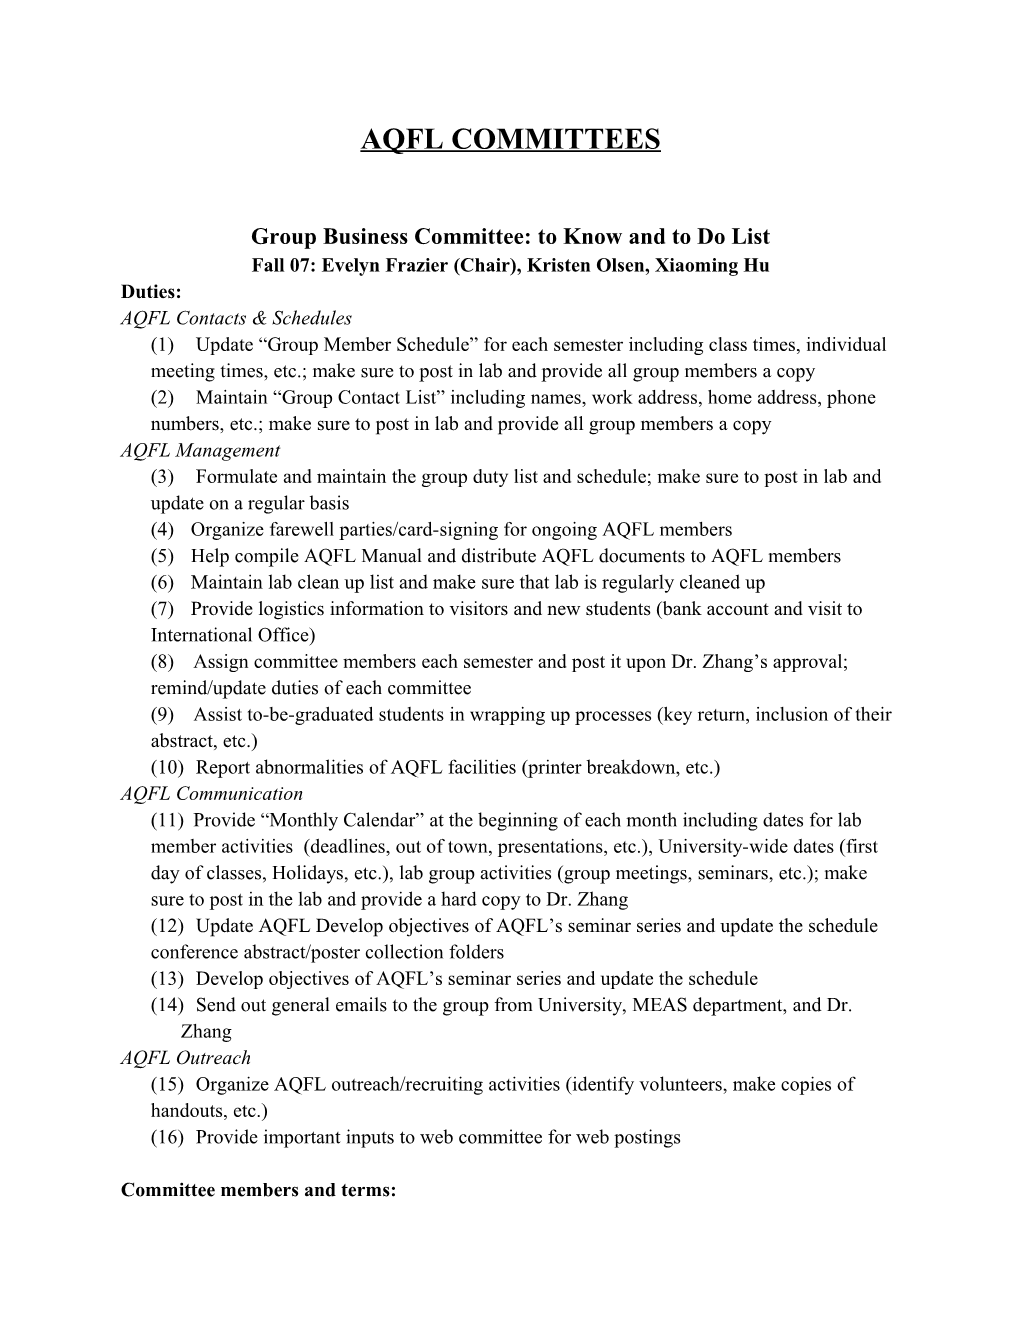 Group Business Committee: to Know and to Do List